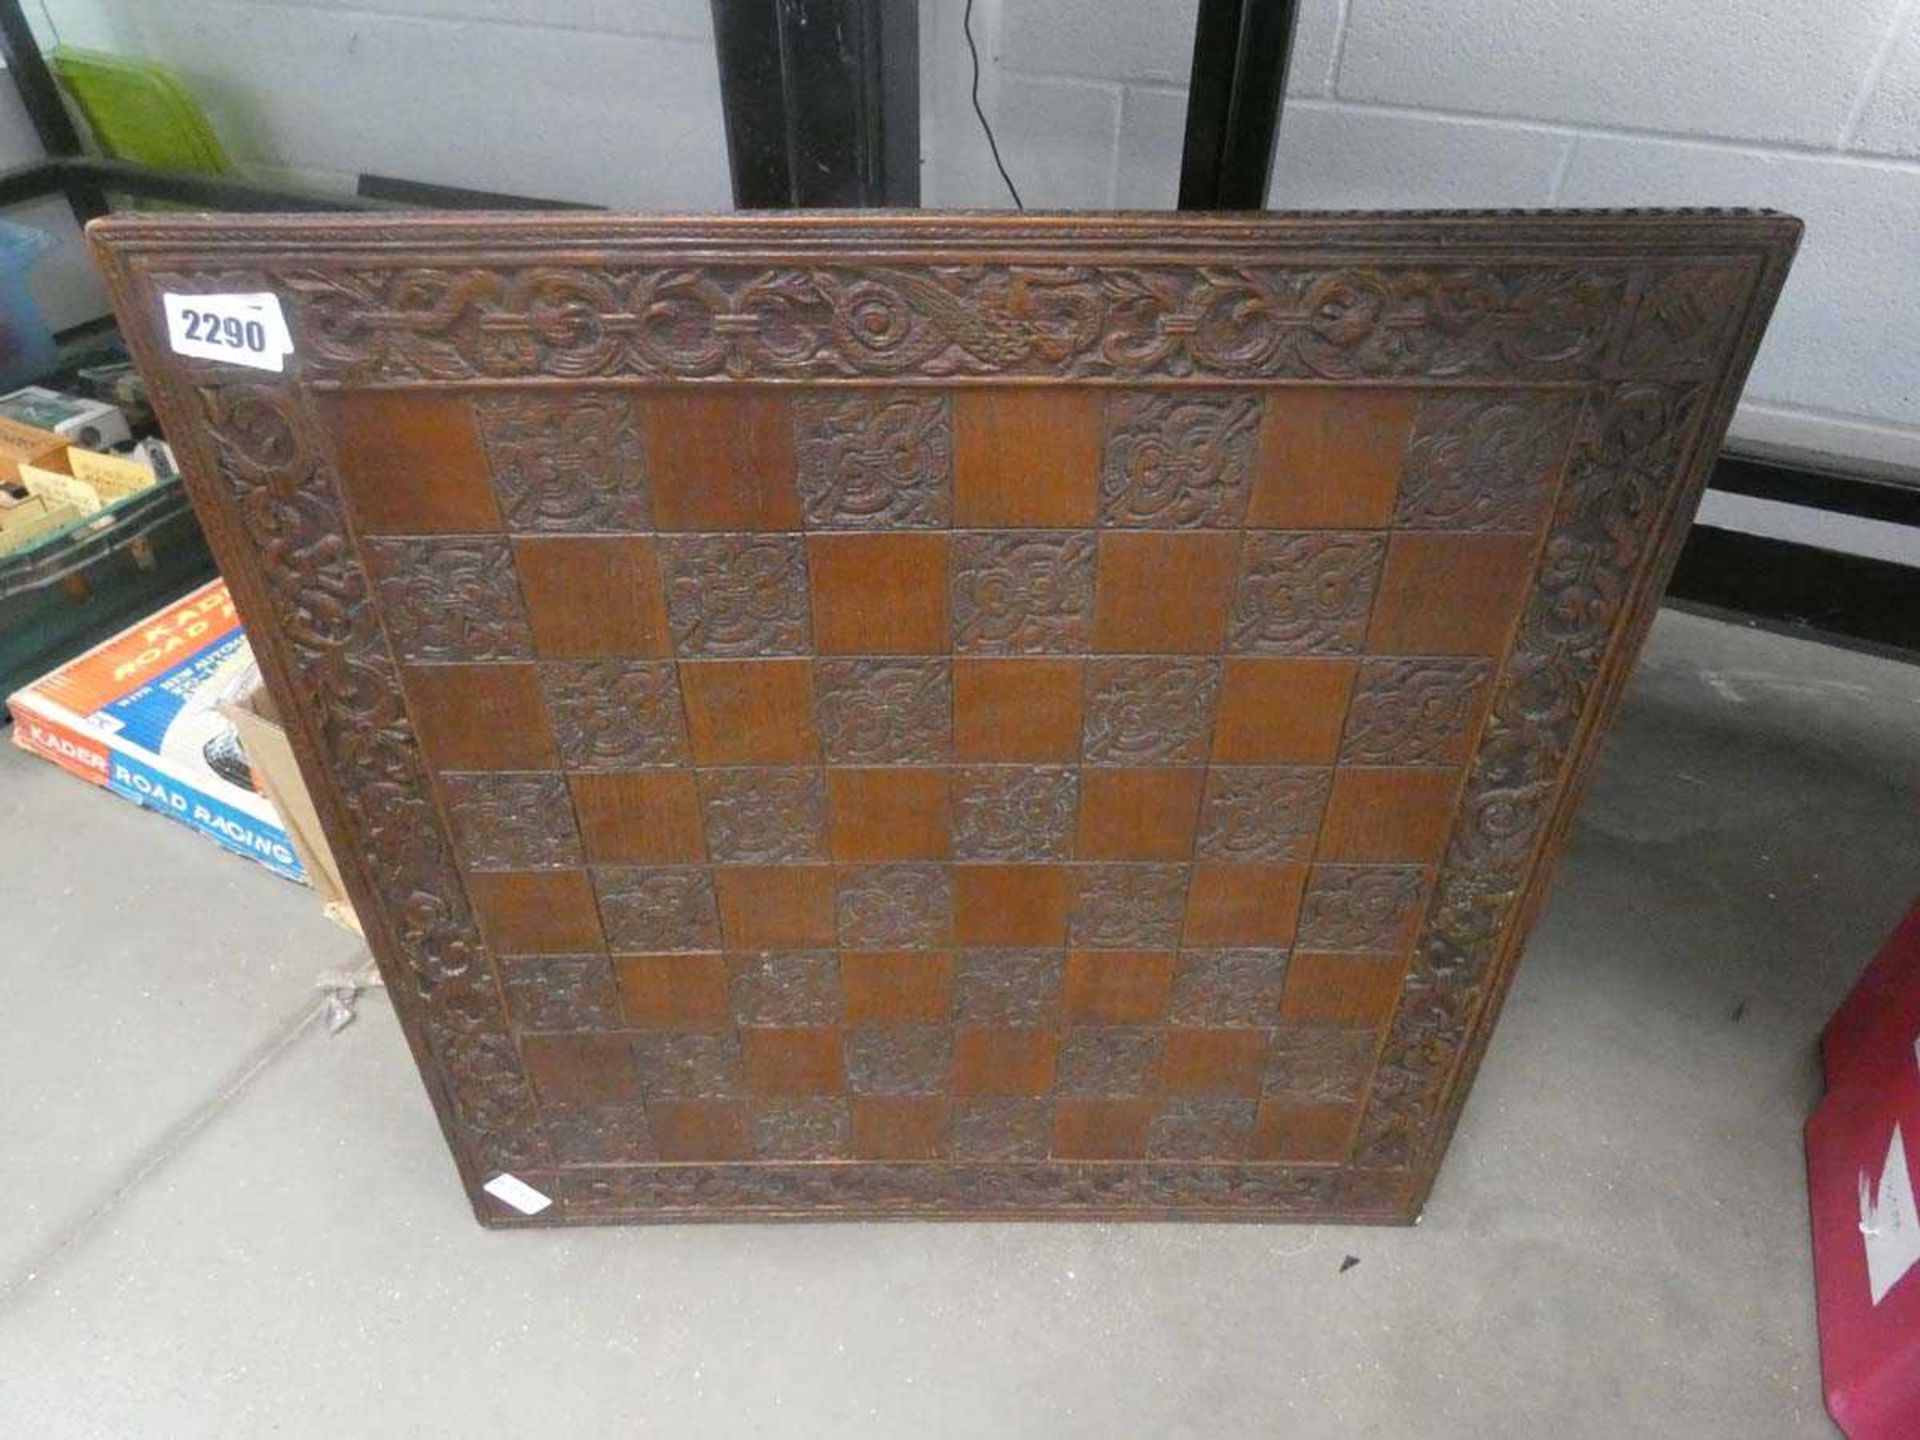 Large scale wooden chessboard, no pieces